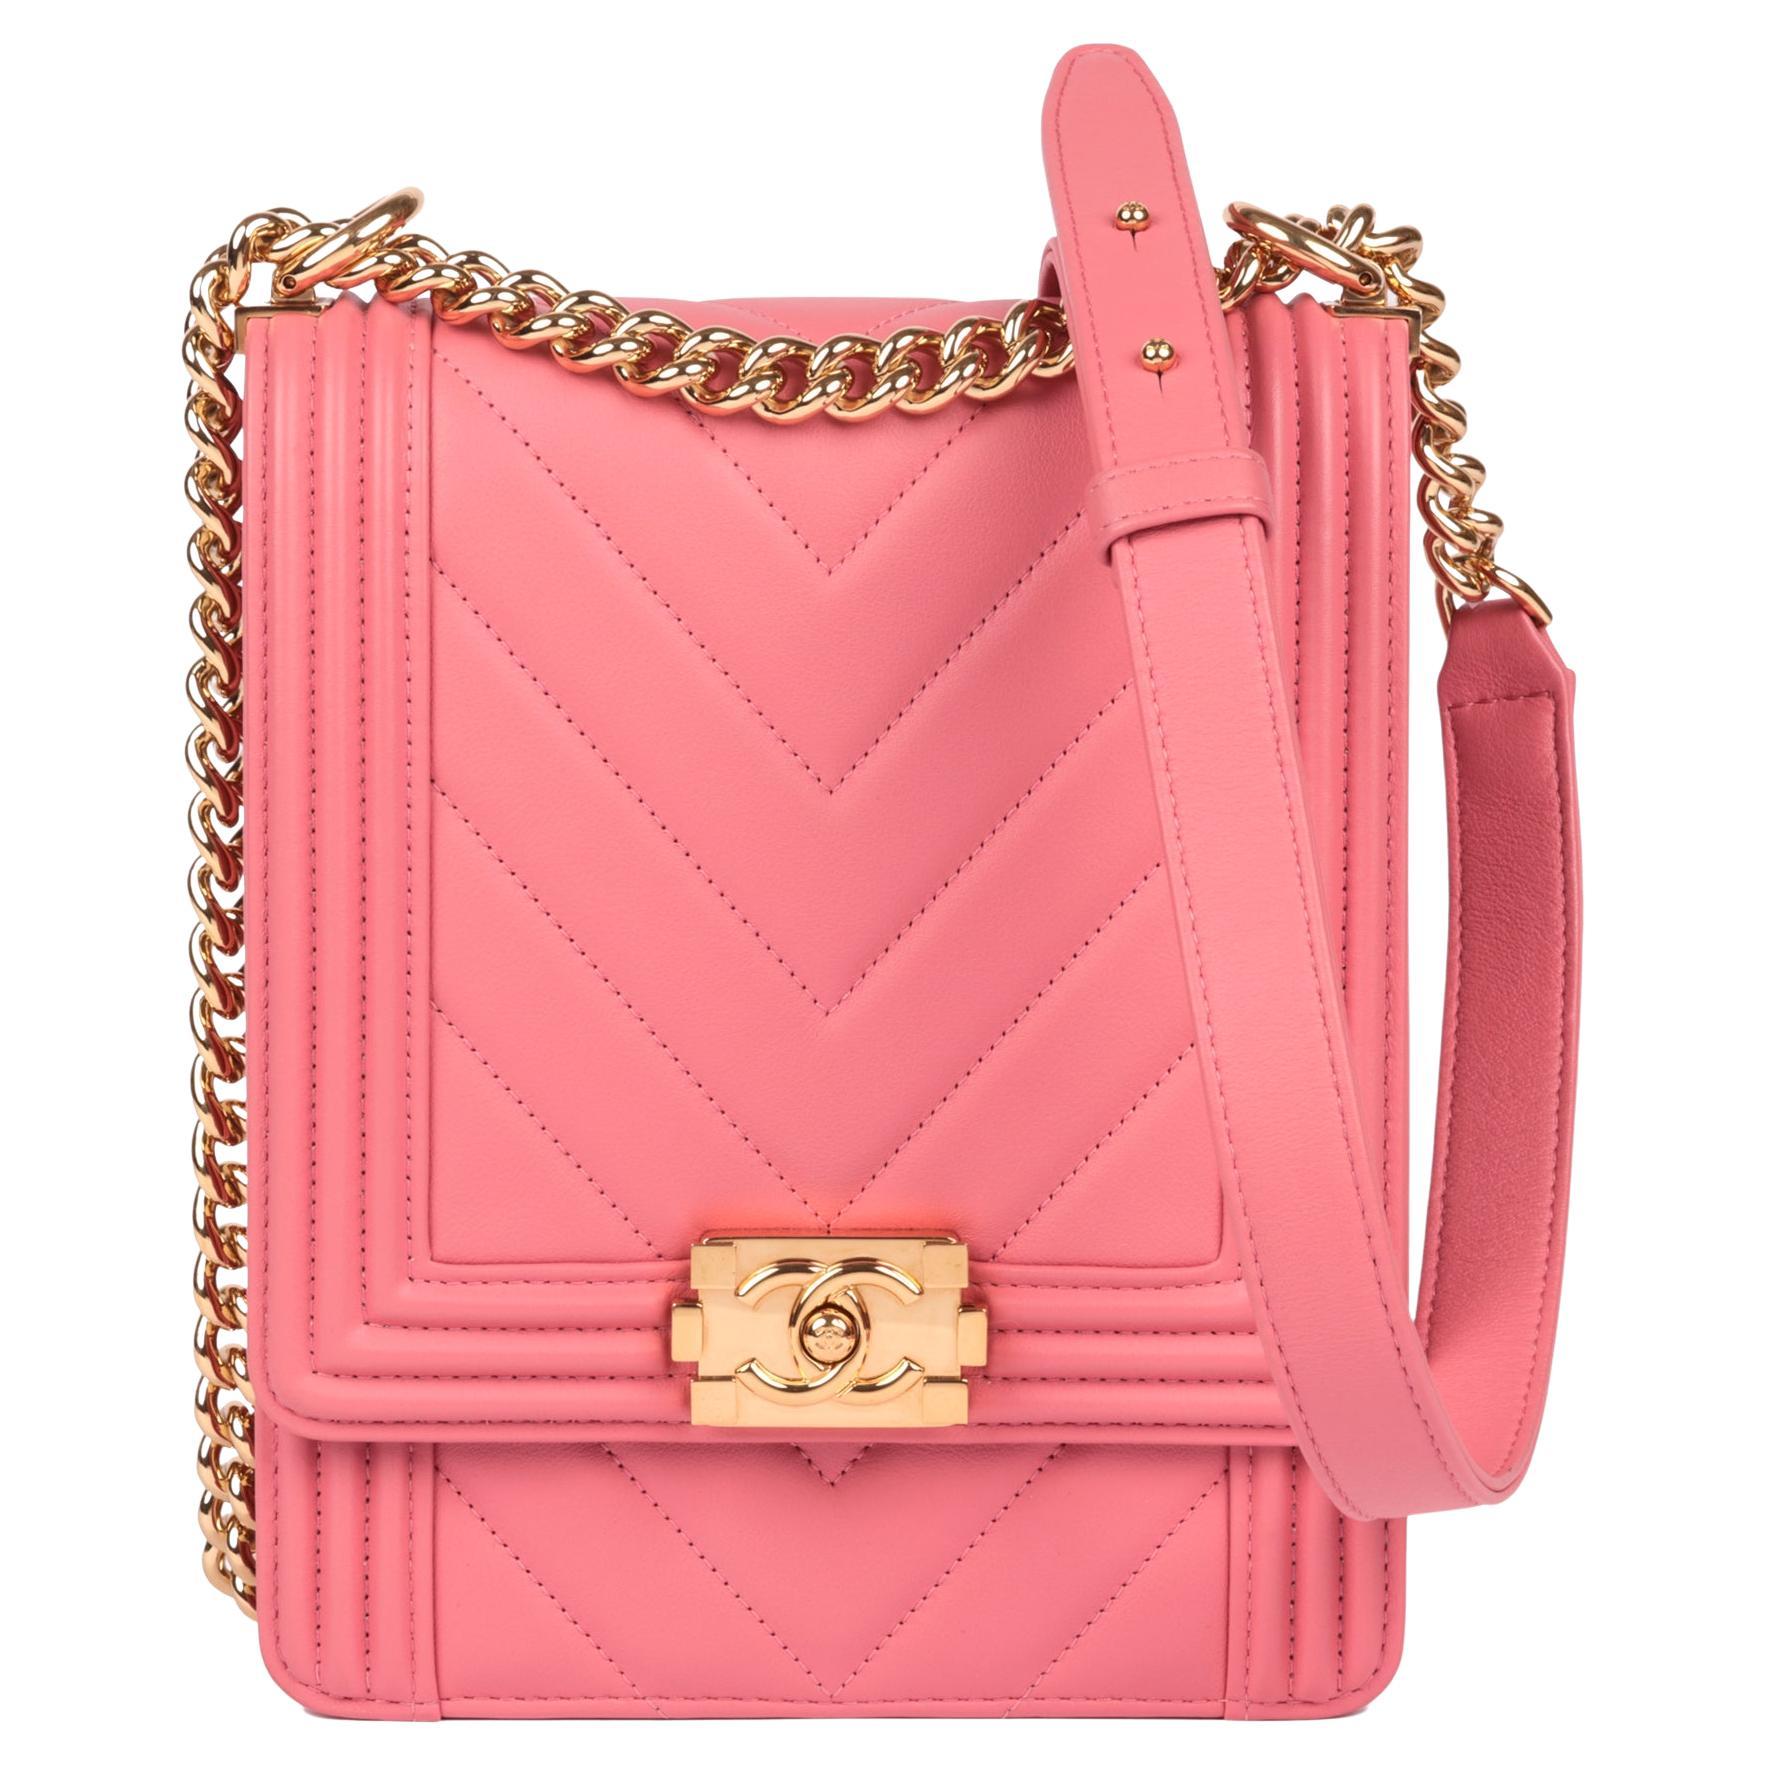 CHANEL Pink Chevron Quilted Lambskin North-South Le Boy For Sale